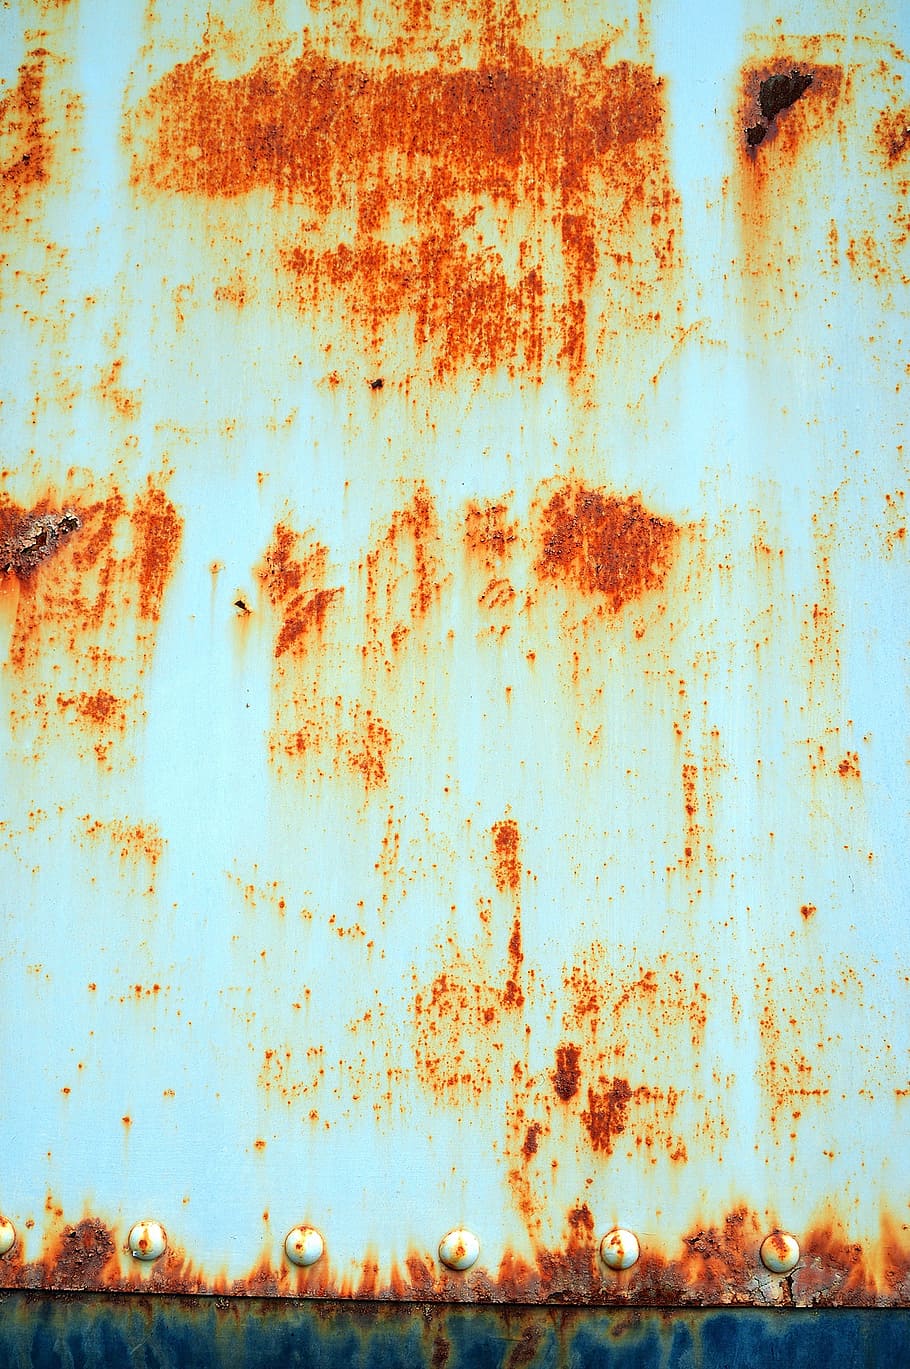 rust, iron, metal, rusty, old, weathered, texture, surface, deterioration, full frame